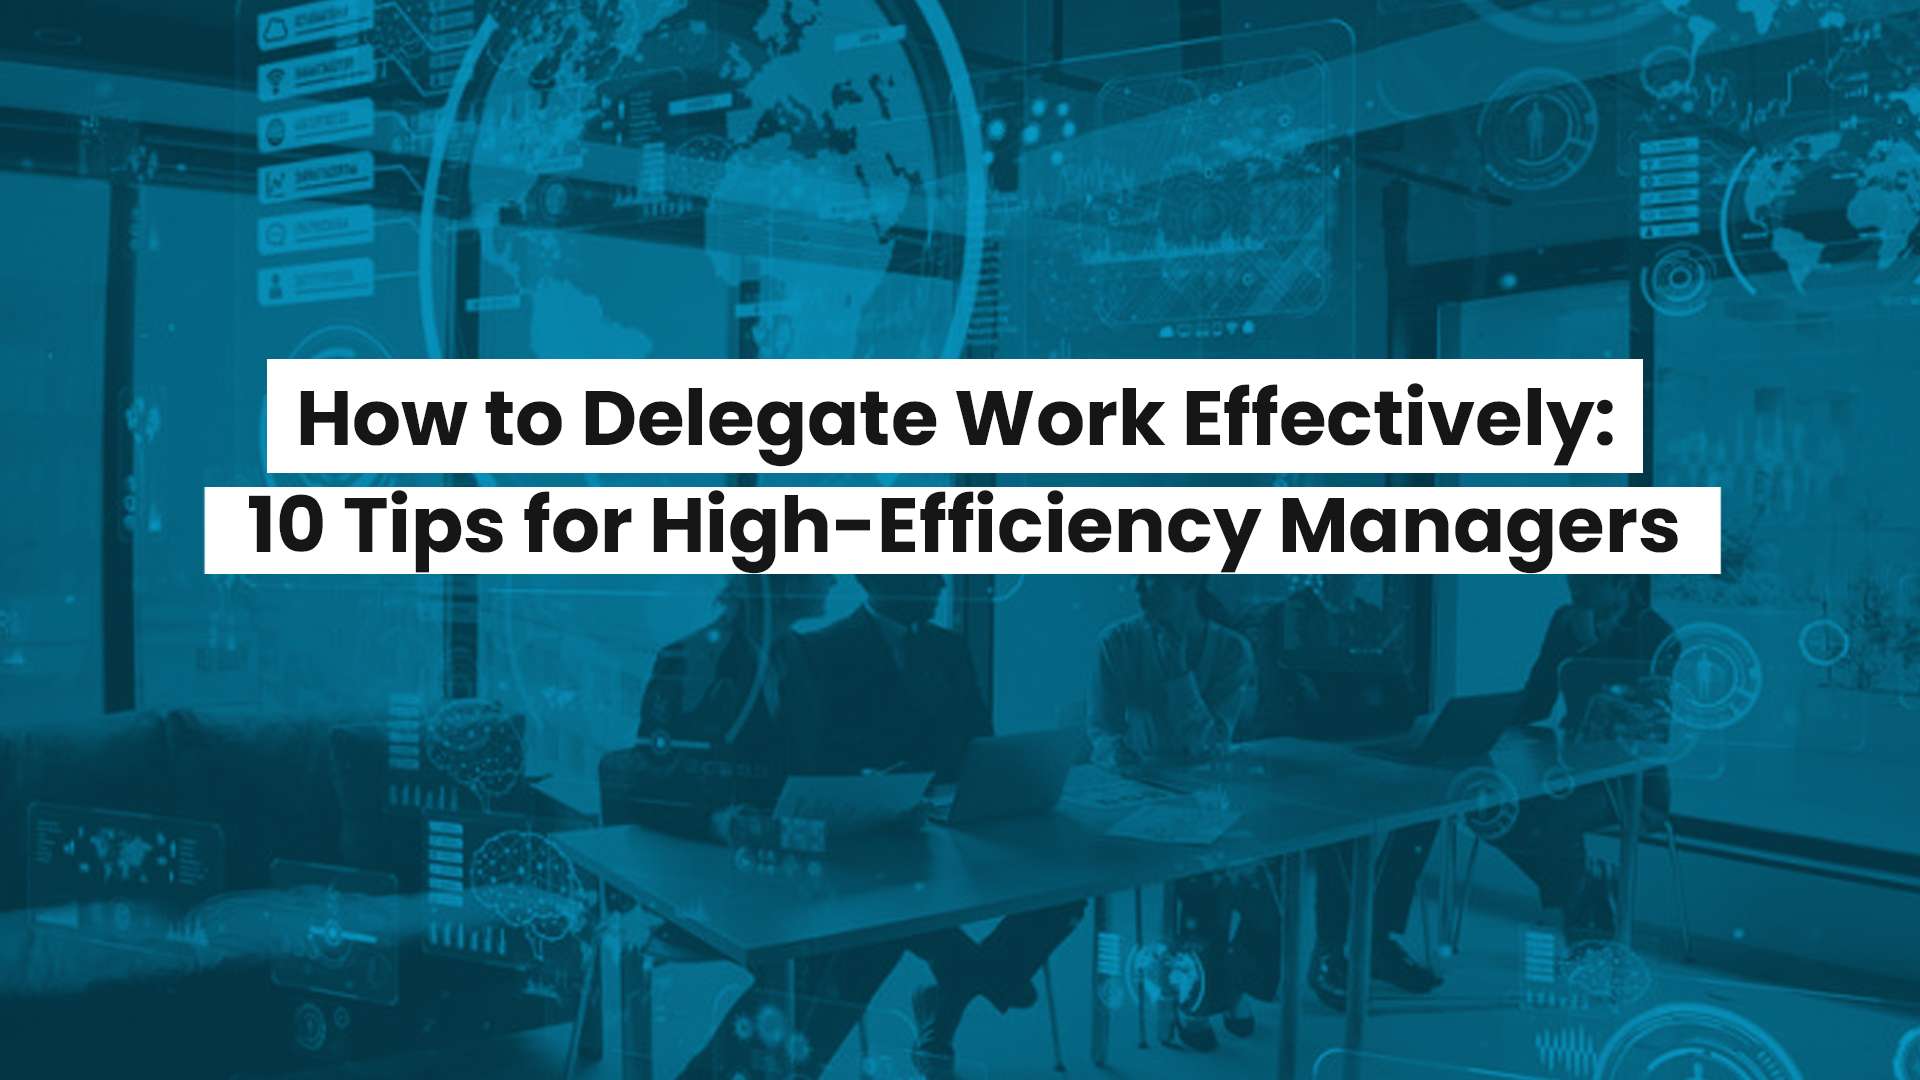 How to Delegate Work Effectively: 10 Tips for High-Efficiency Managers